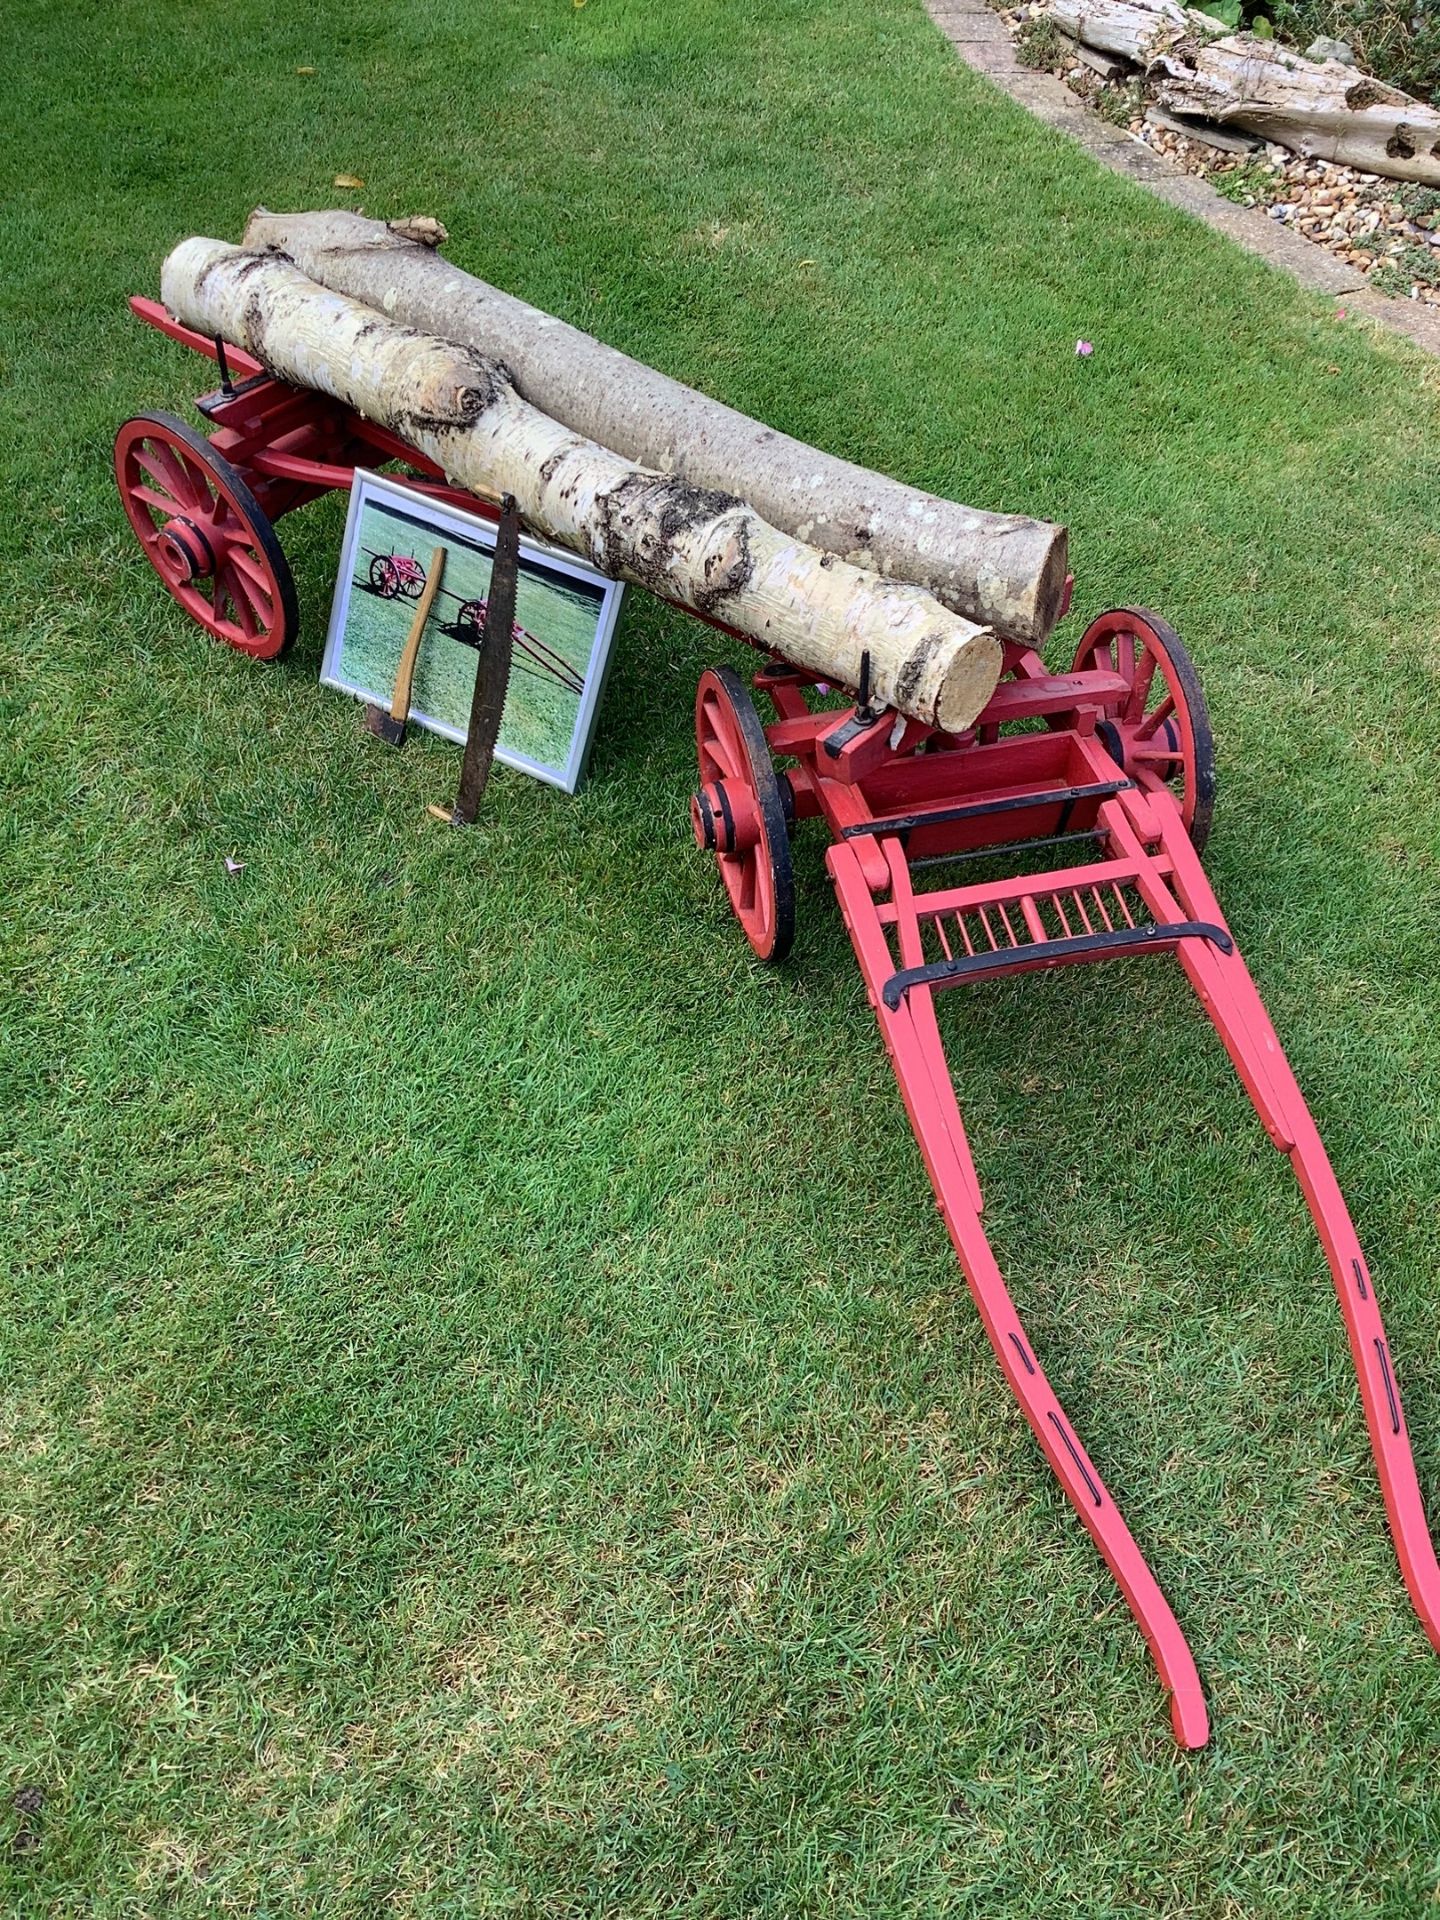 TIMBER BOB painted red on iron shod wheels. Comes with tools. 6ft long and complete with shafts.